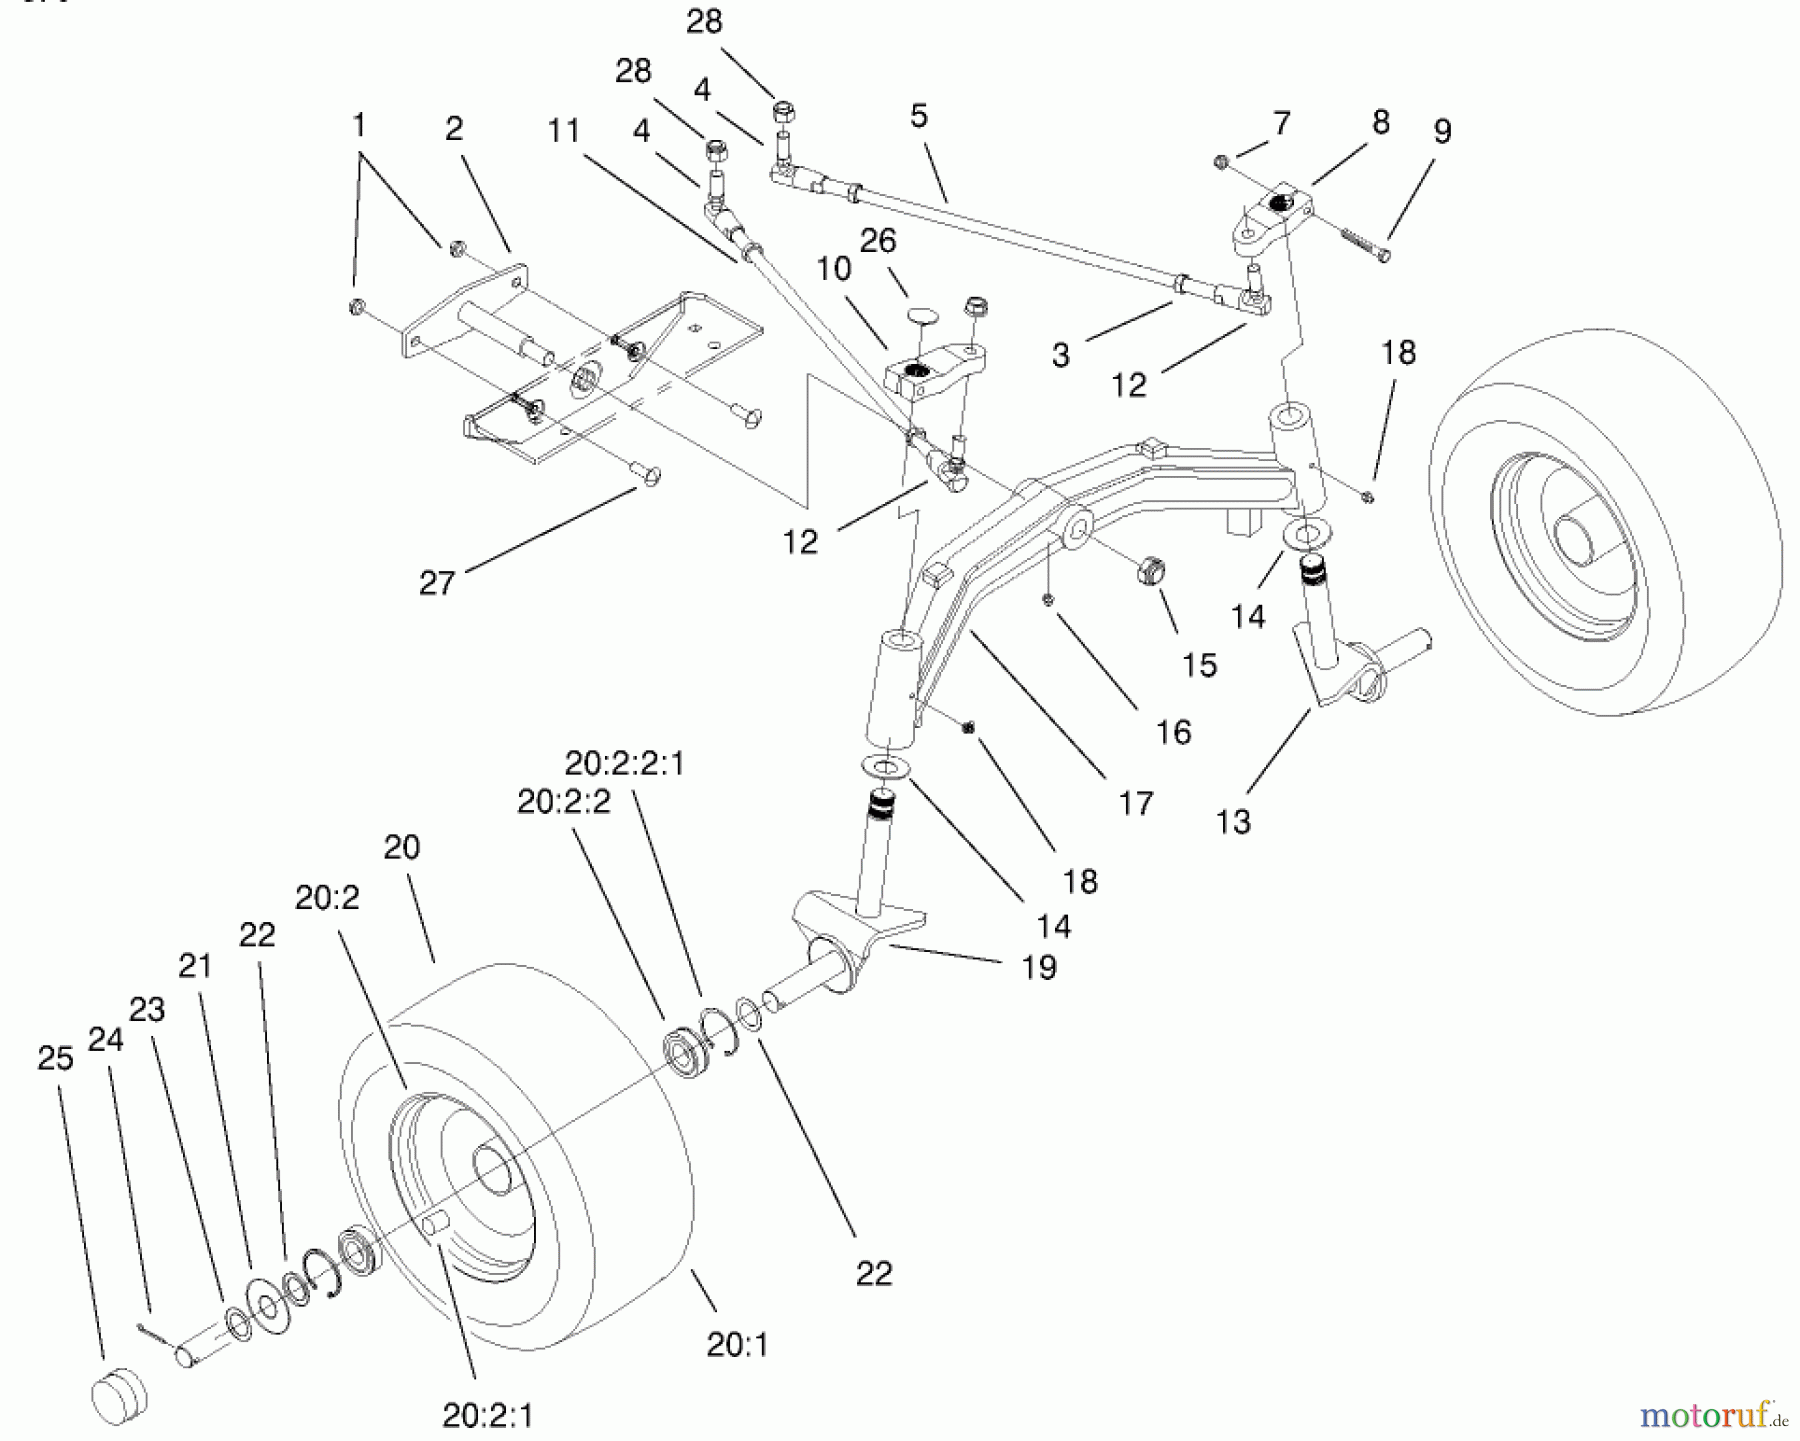  Toro Neu Mowers, Lawn & Garden Tractor Seite 1 73542 (520xi) - Toro 520xi Garden Tractor, 2000 (200000001-200999999) TIE RODS, SPINDLE, & FRONT AXLE ASSEMBLY